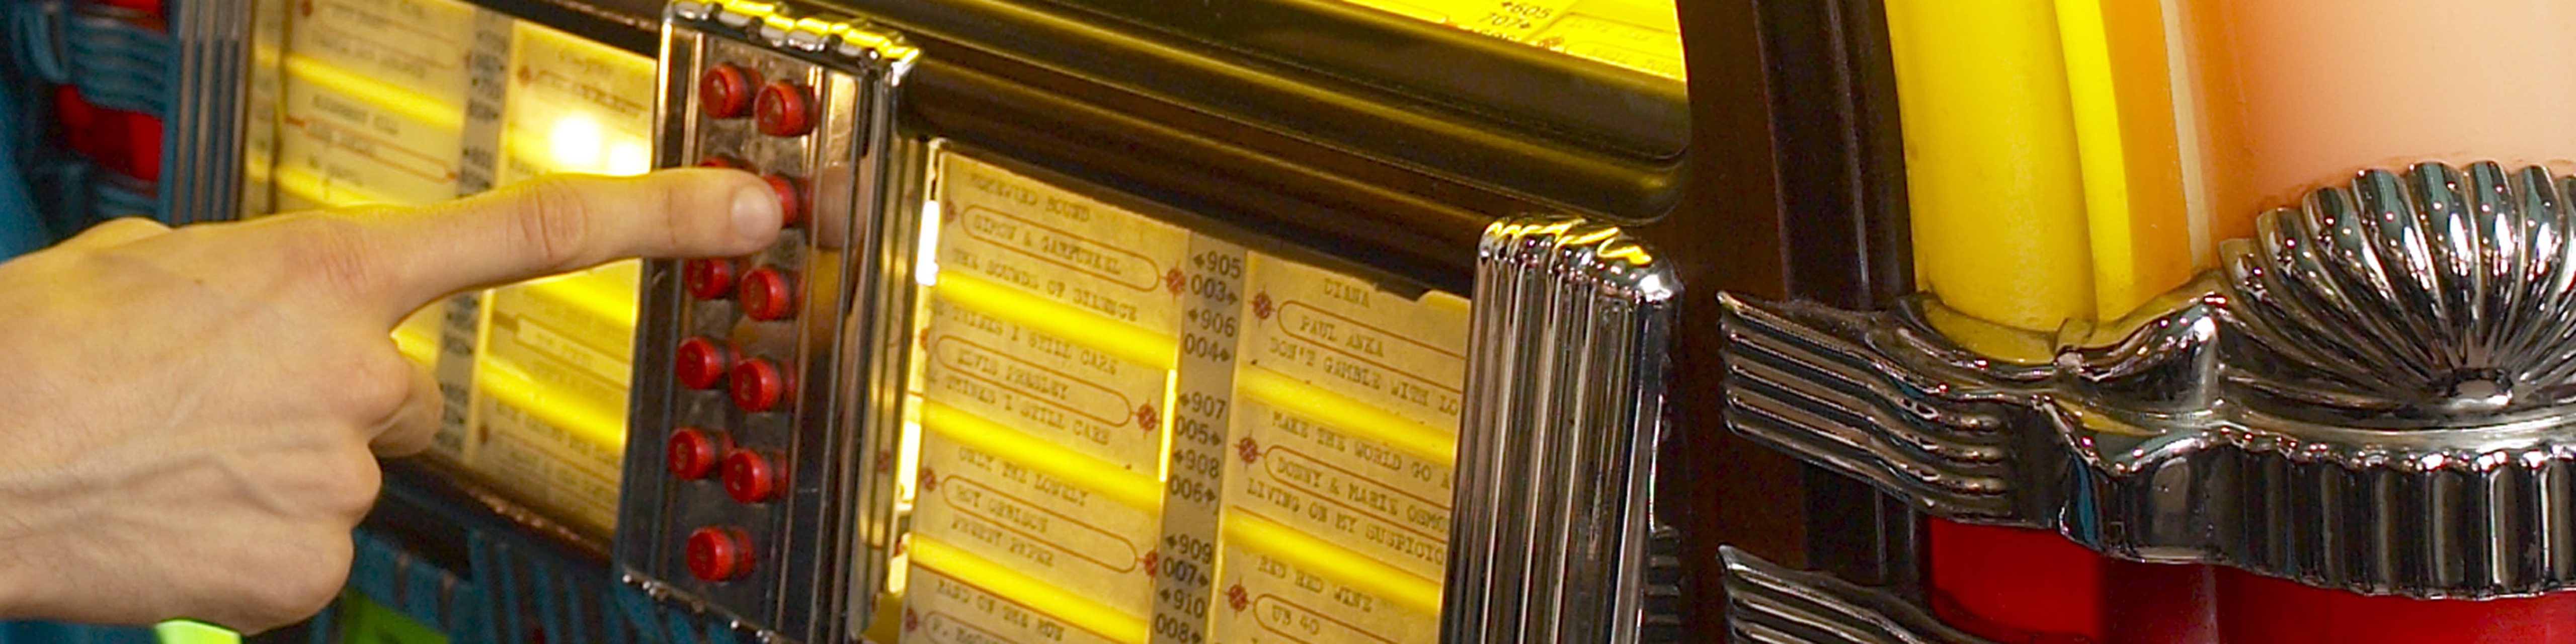 a close up of a finger pressing a button on a jukebox